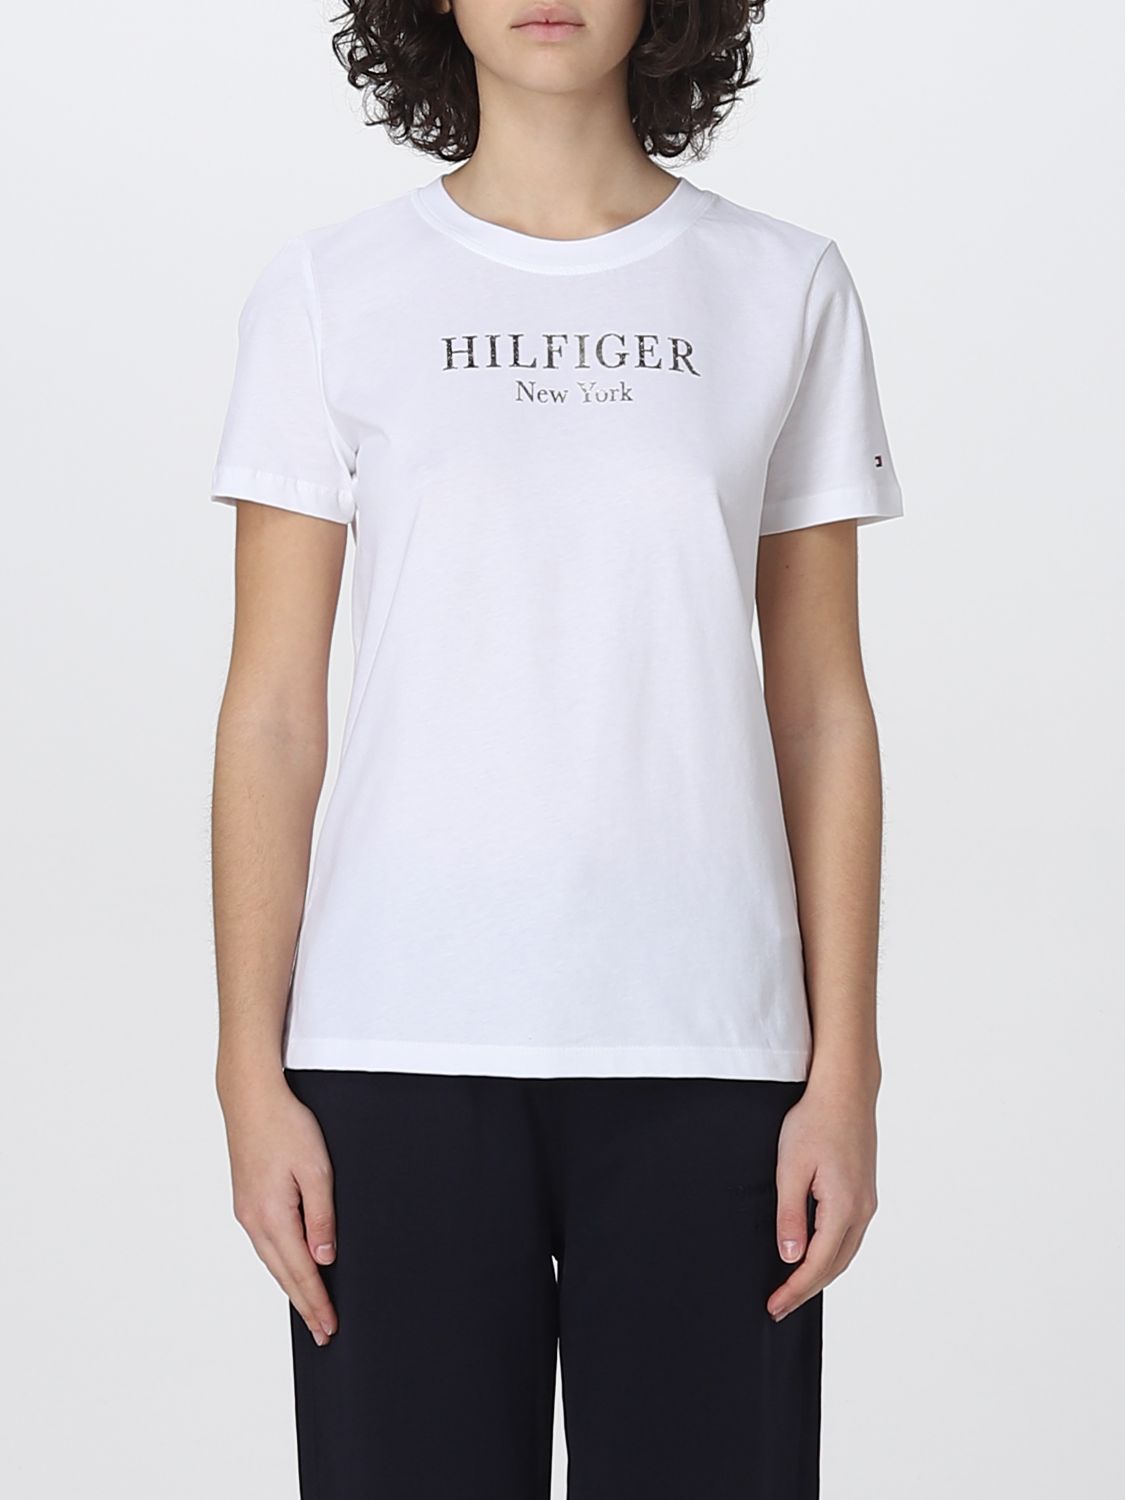 TOMMY HILFIGER: t-shirt for woman - White | Tommy Hilfiger t-shirt ...